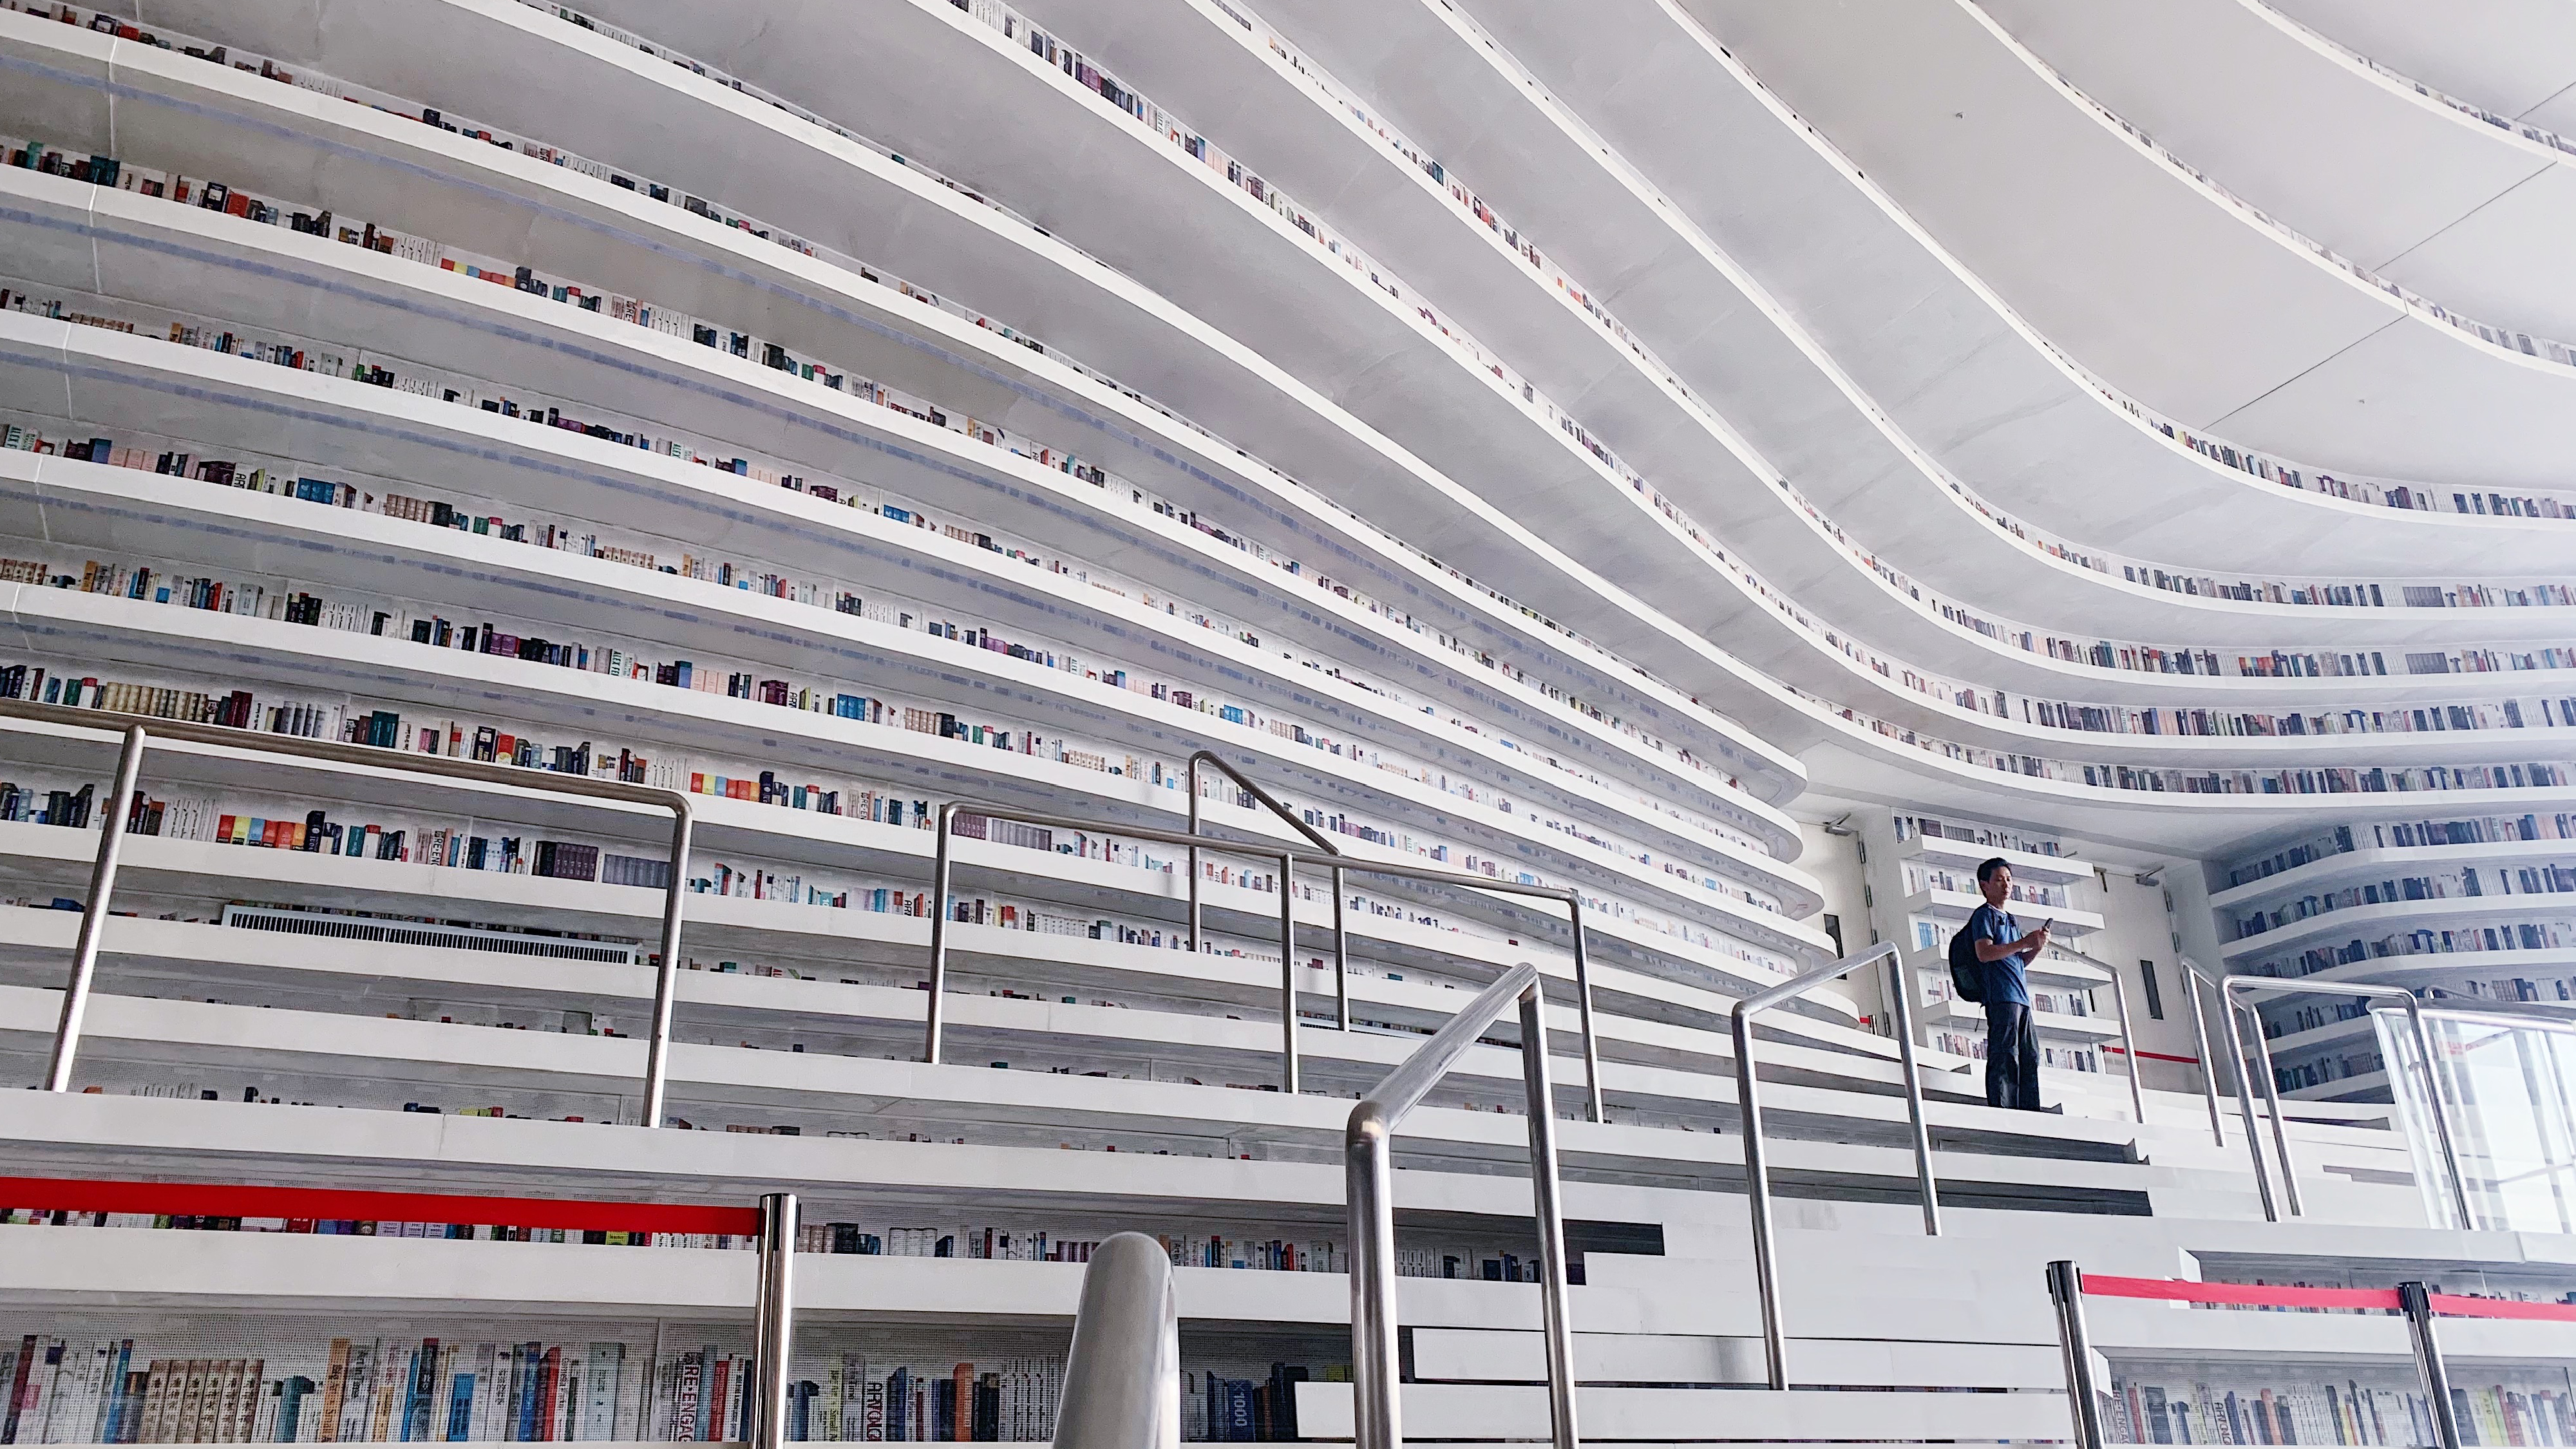 The 5 main reasons there is still a place for books in the modern world